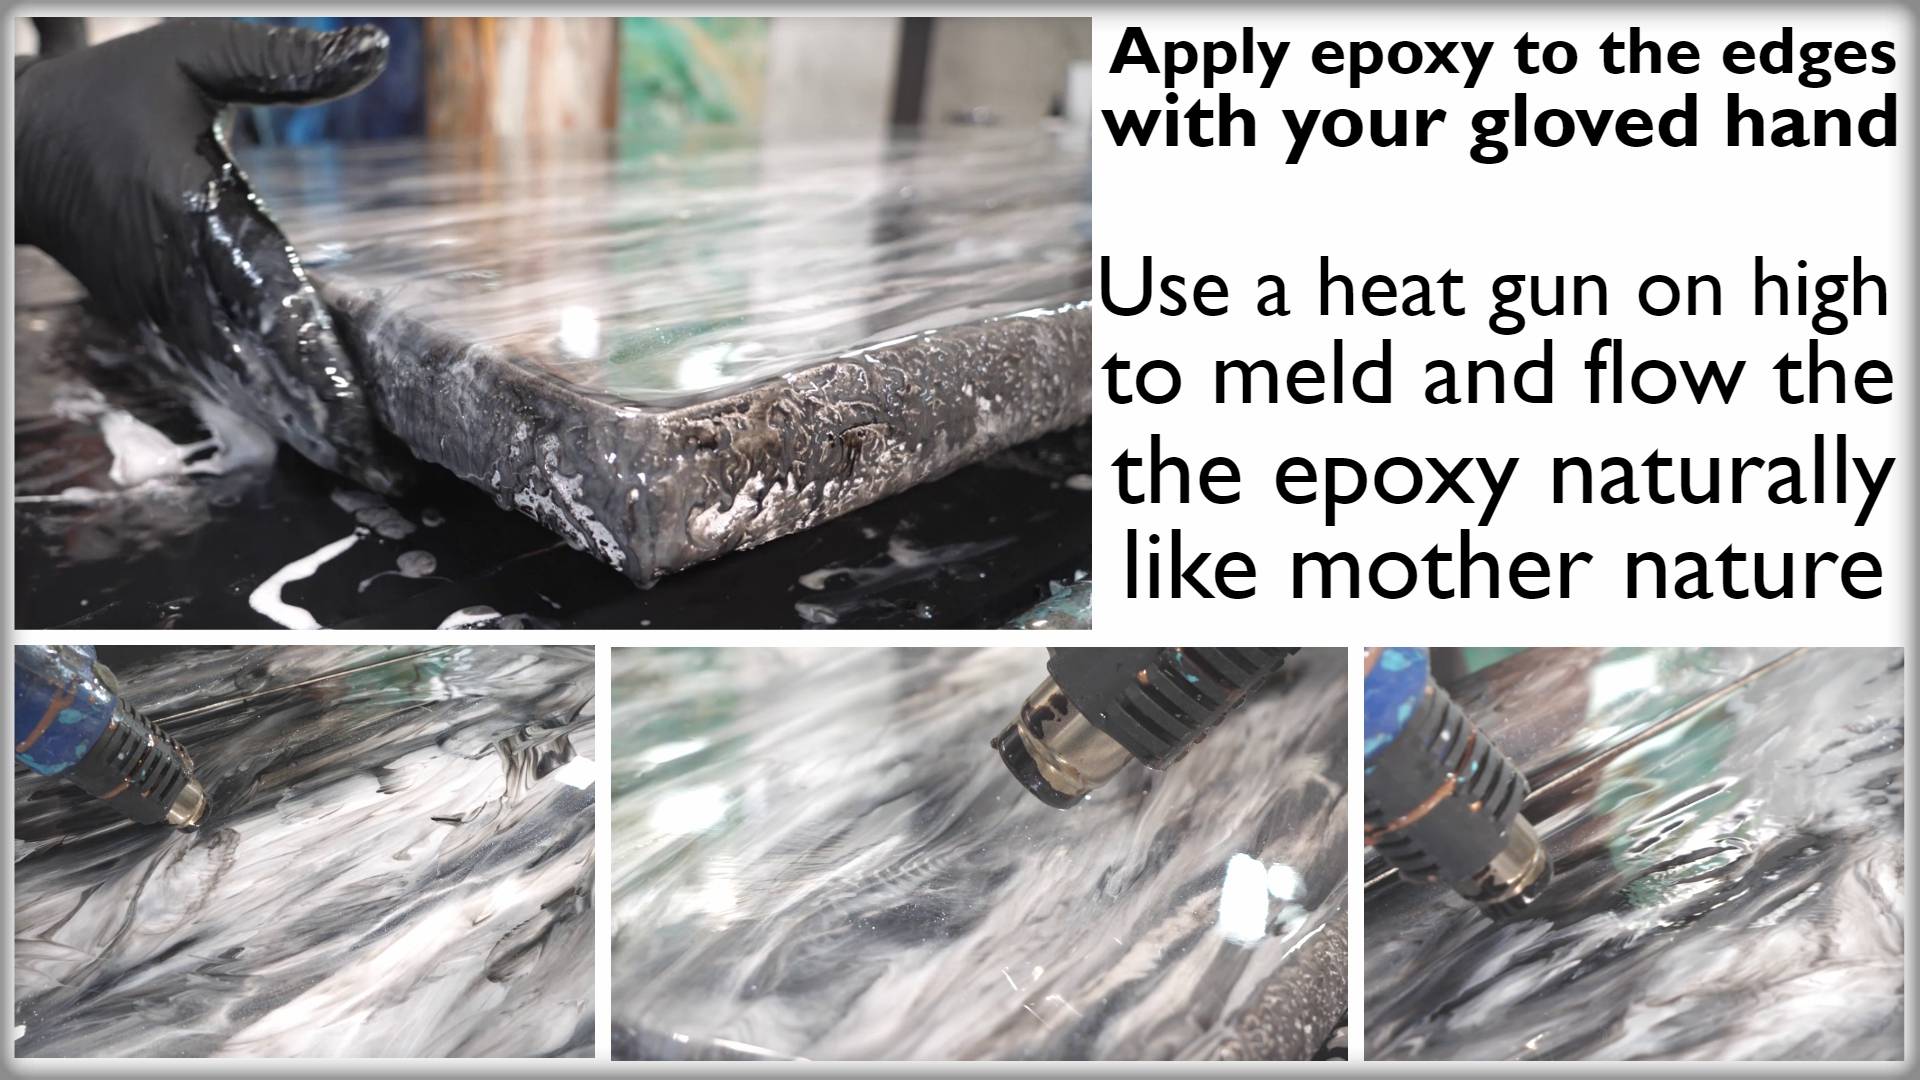 Apply epoxy to the edges with your gloved hand. Use a high-heat heat gun to meld and flow the epoxy naturally like Mother Nature.